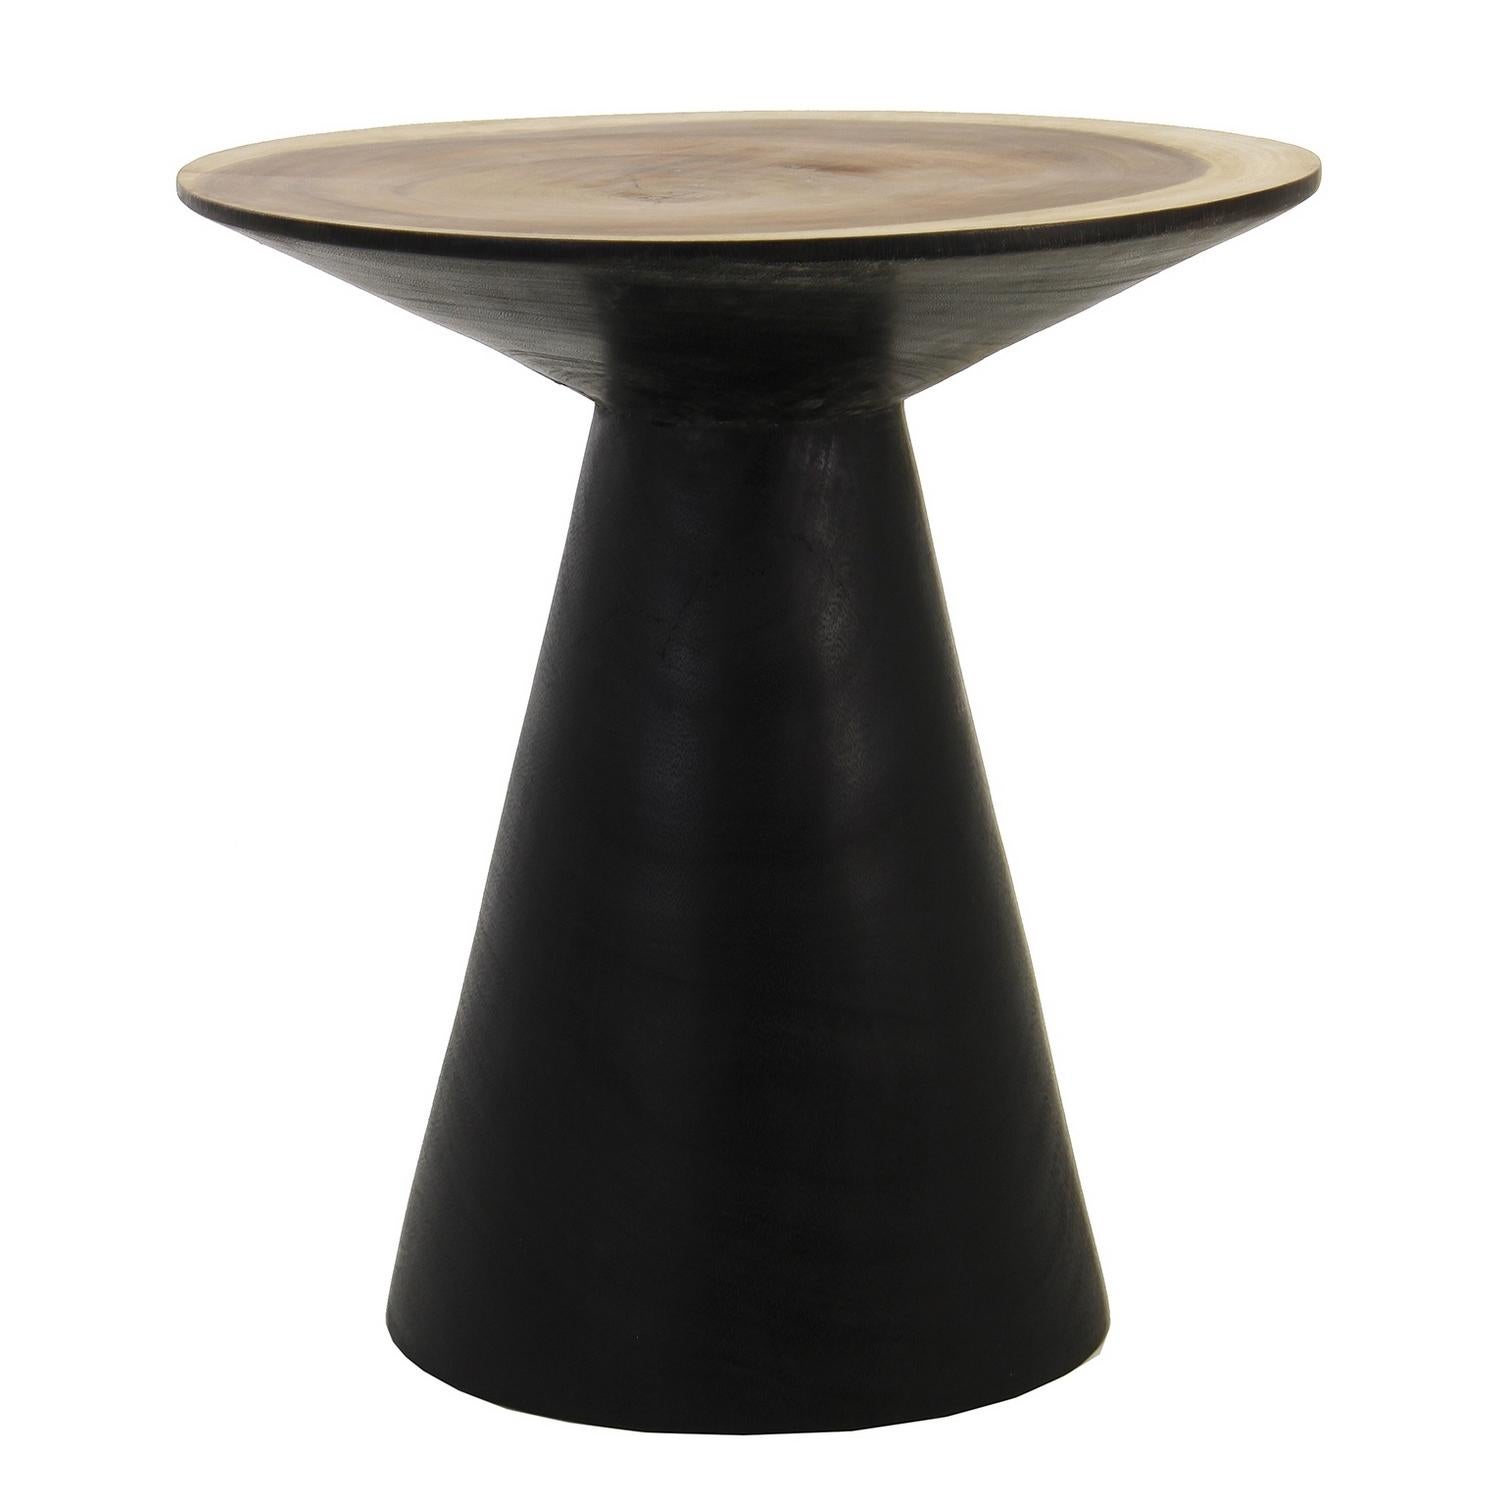 Pair of MCM style ebonized solid wood side tables.